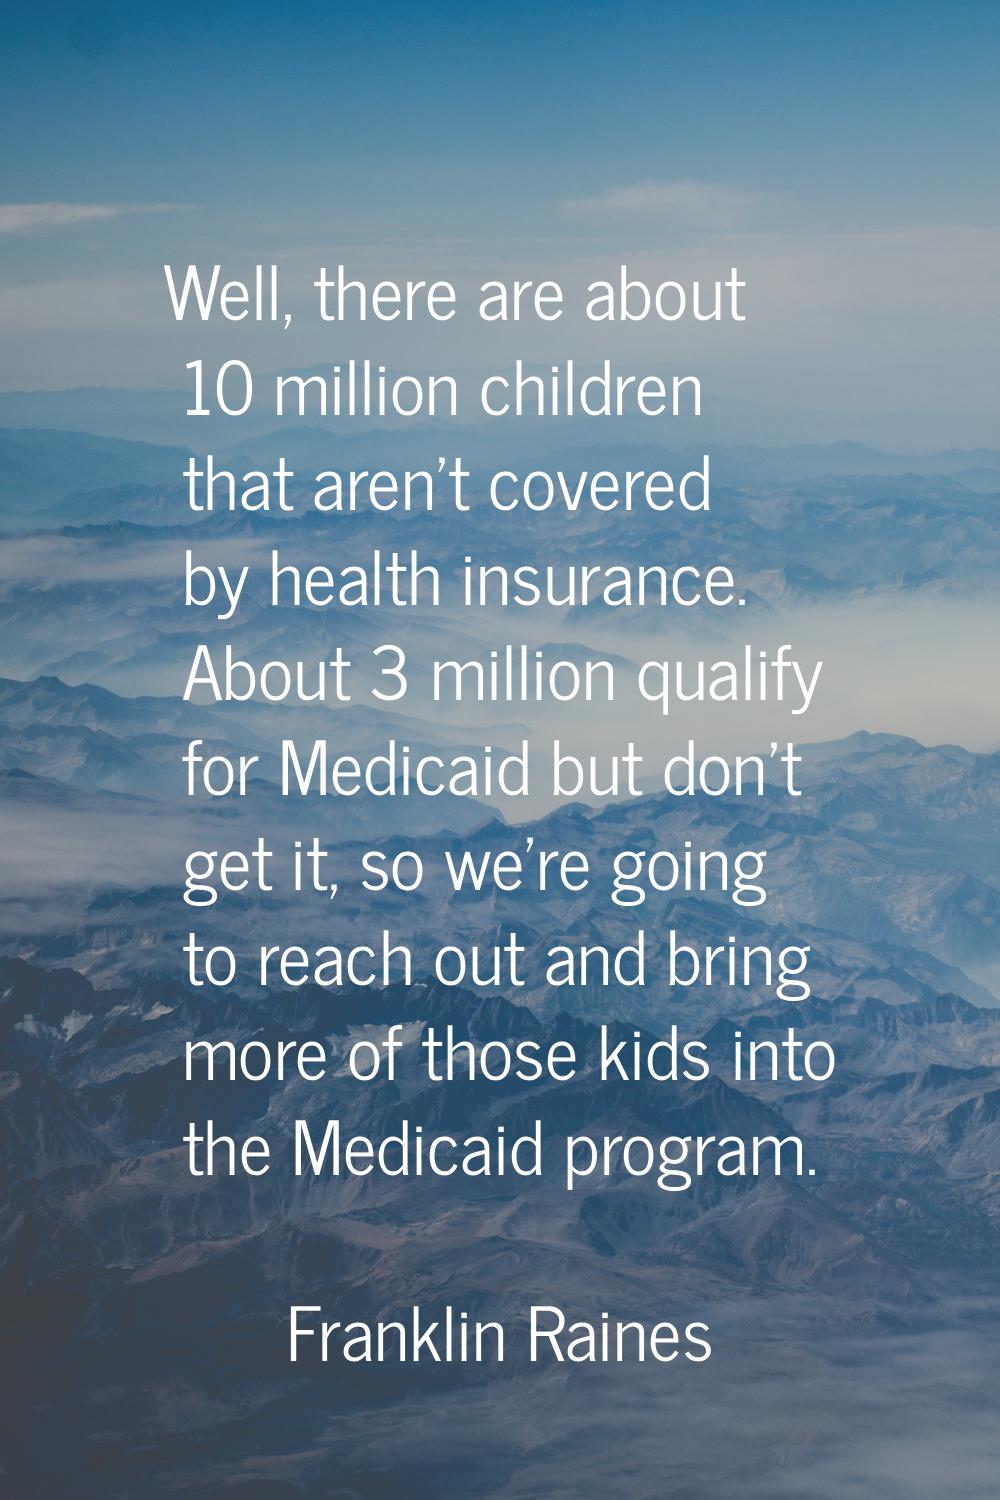 Well, there are about 10 million children that aren't covered by health insurance. About 3 million 